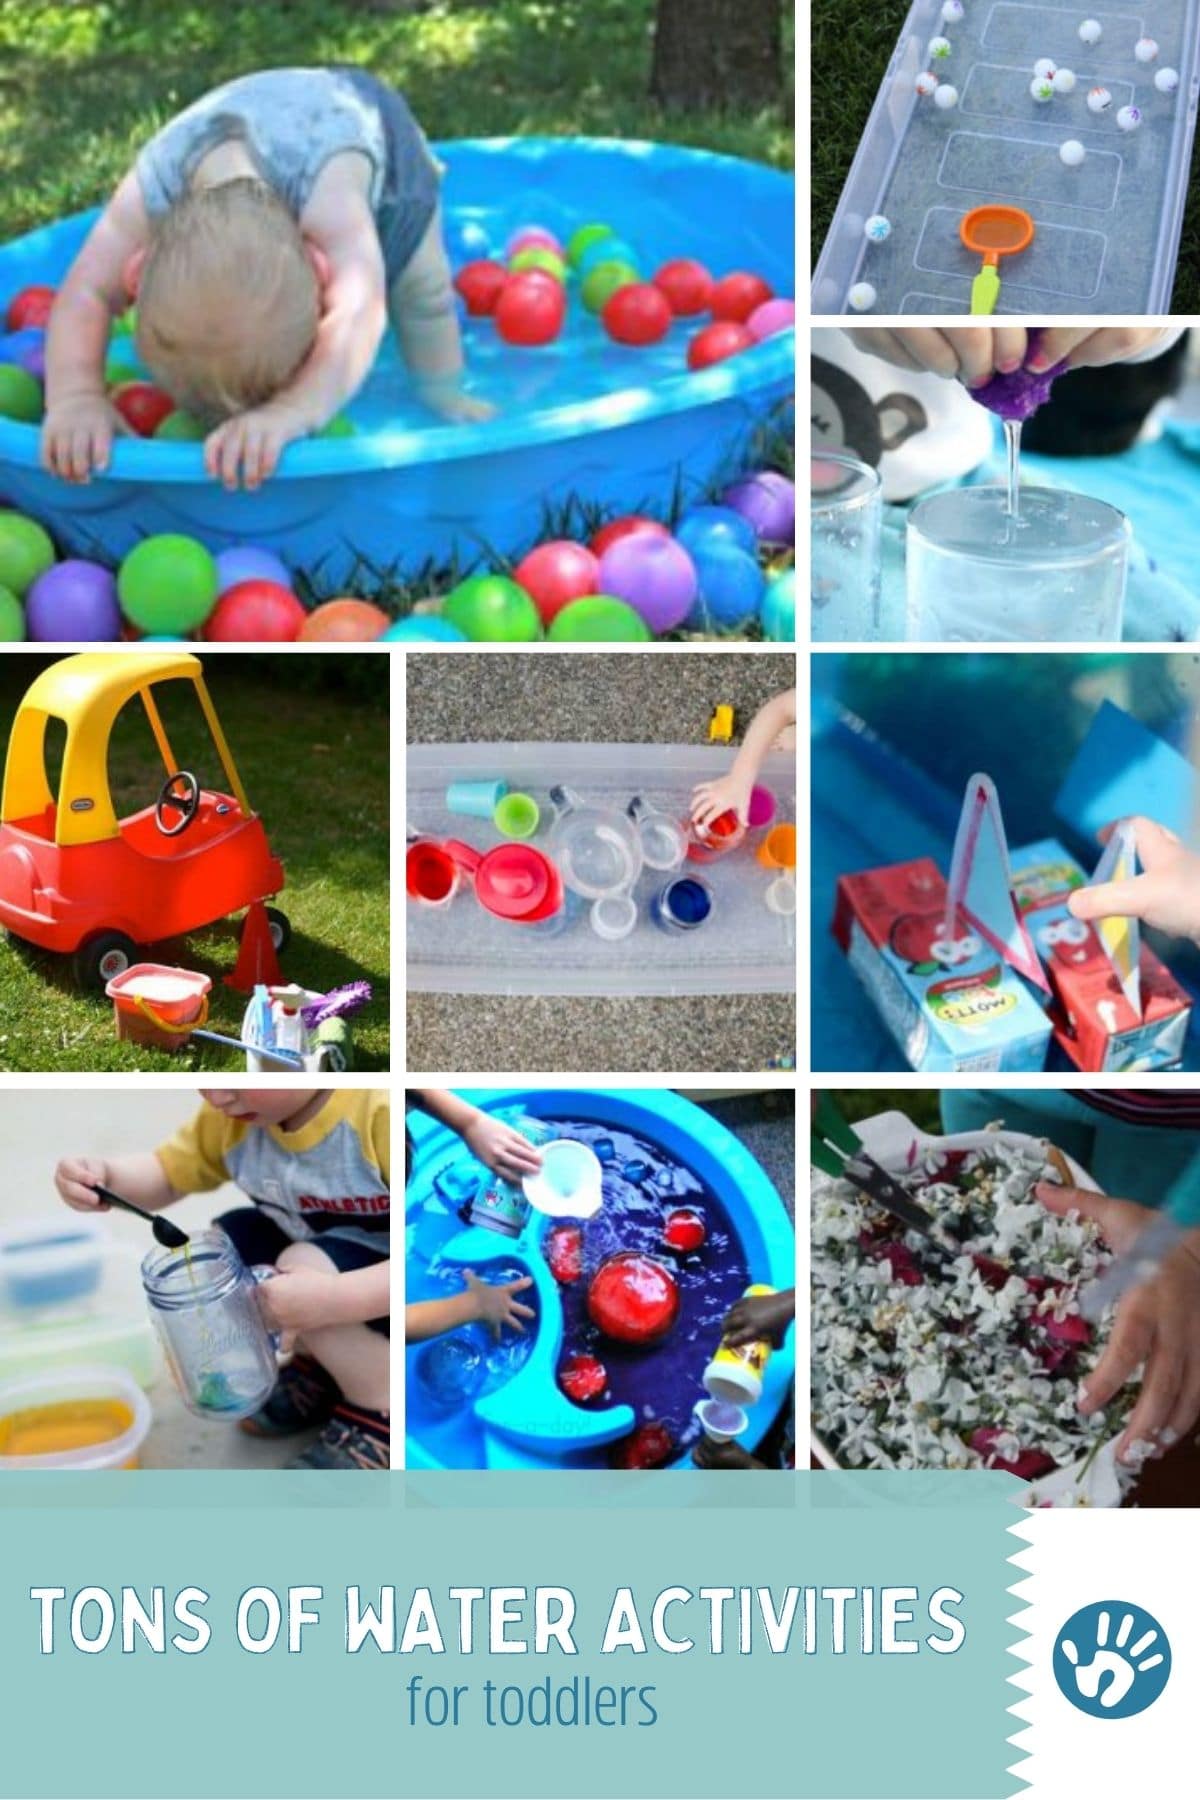 Water Activities for Toddlers that are Tons of Fun & Simple, Too! - HOAWG